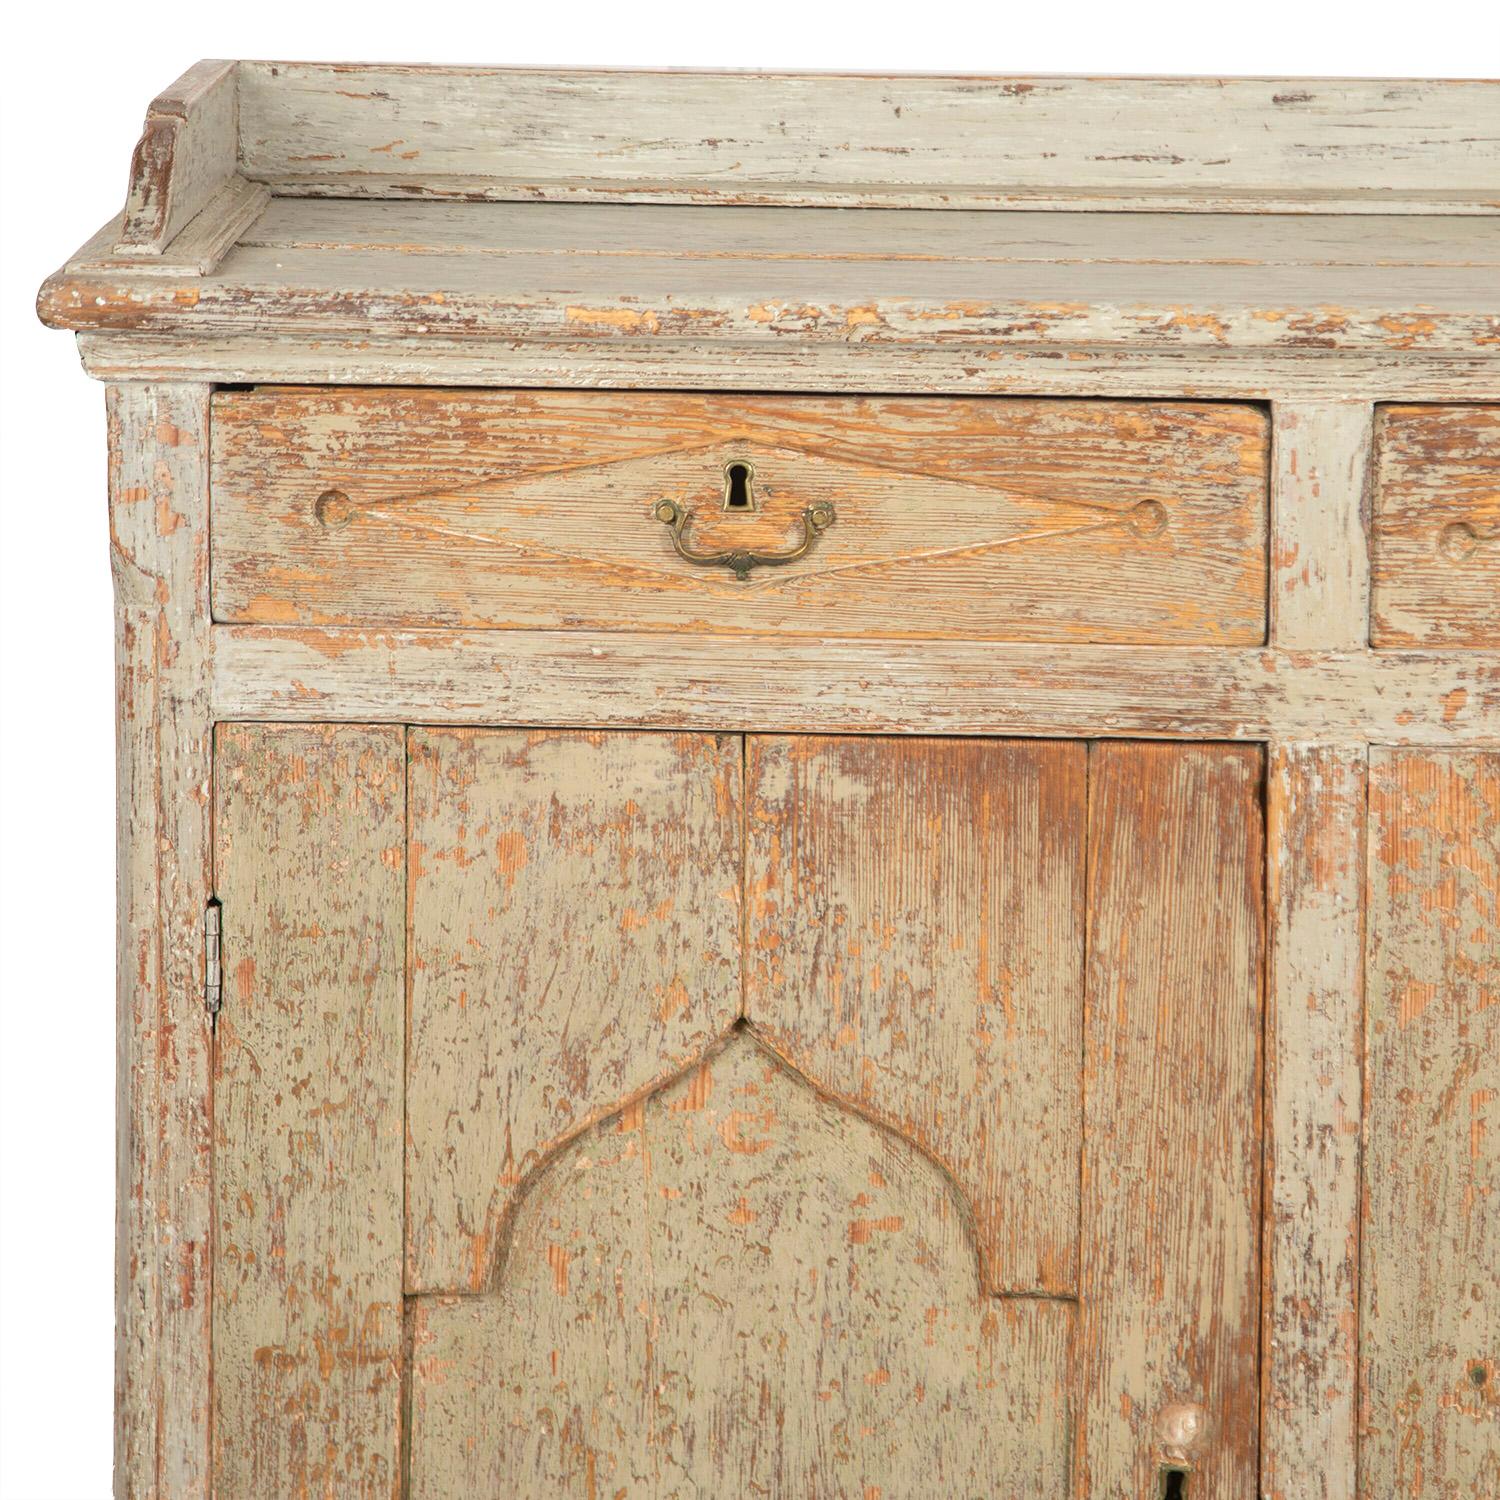 Exceptional wide Swedish buffet in wood from Jämtland, with a carved gallery top. Three drawers with original hardware, and beneath, three doors with decorative carved Gothic design open to useful storage space.